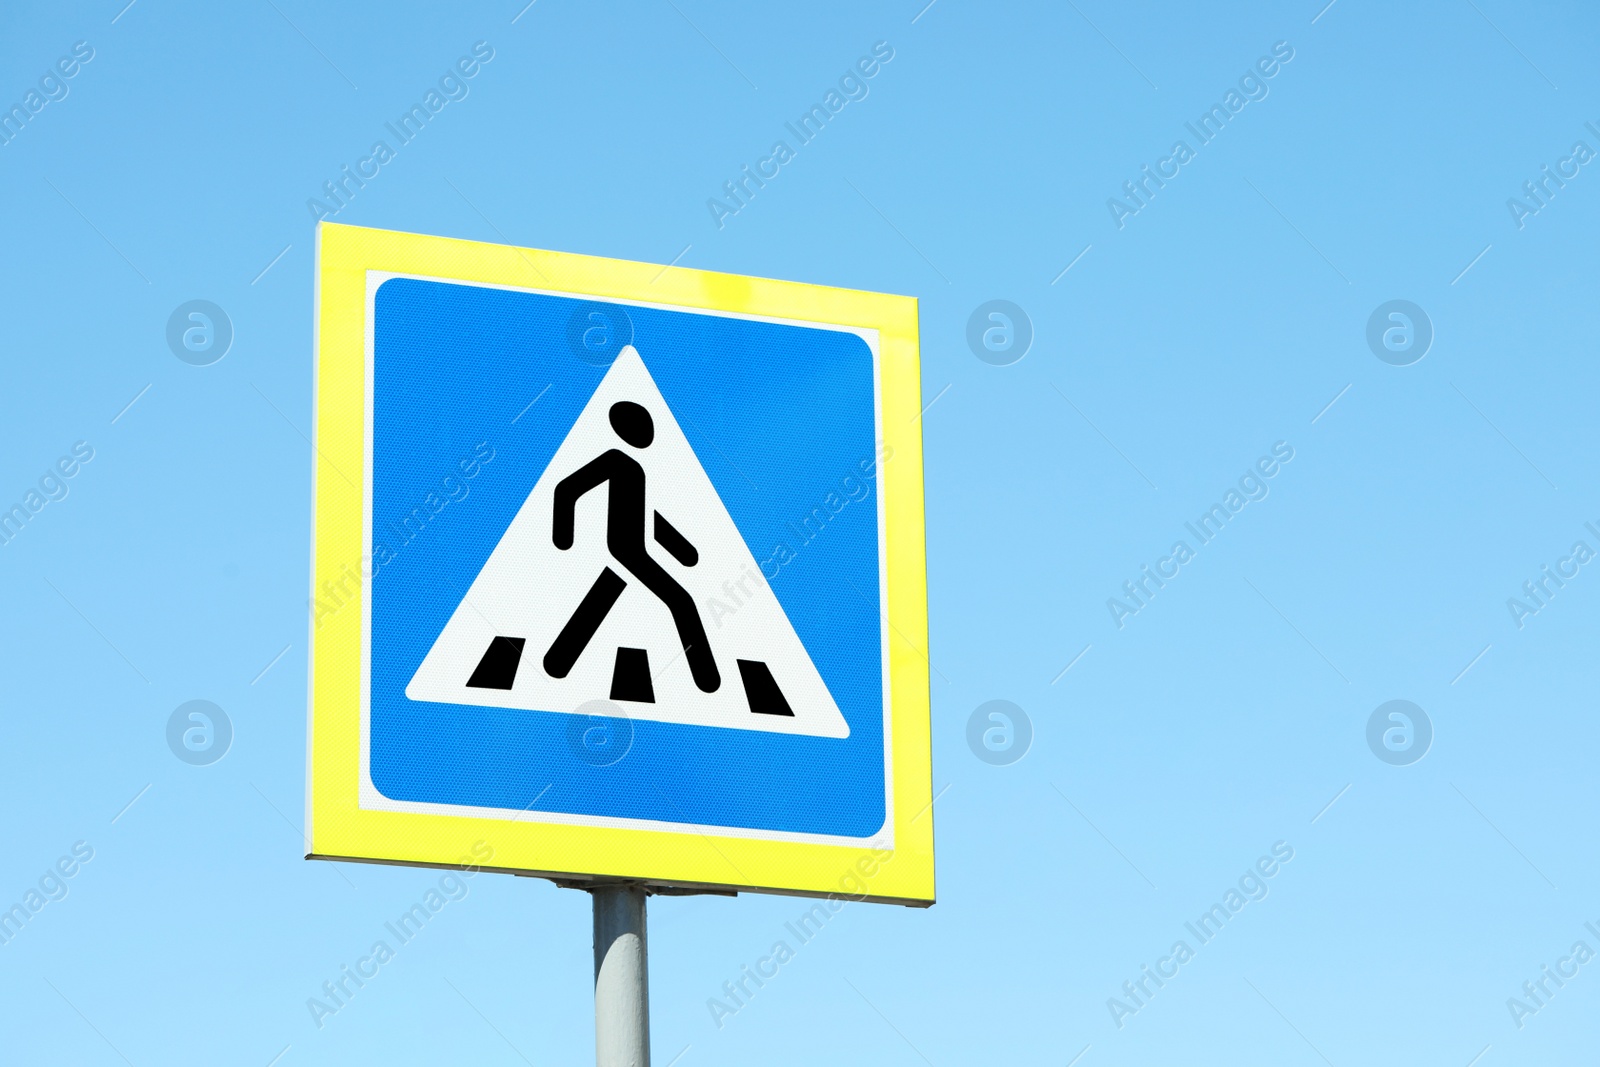 Photo of Post with Pedestrian Crossing traffic sign against blue sky on sunny day. Space for text